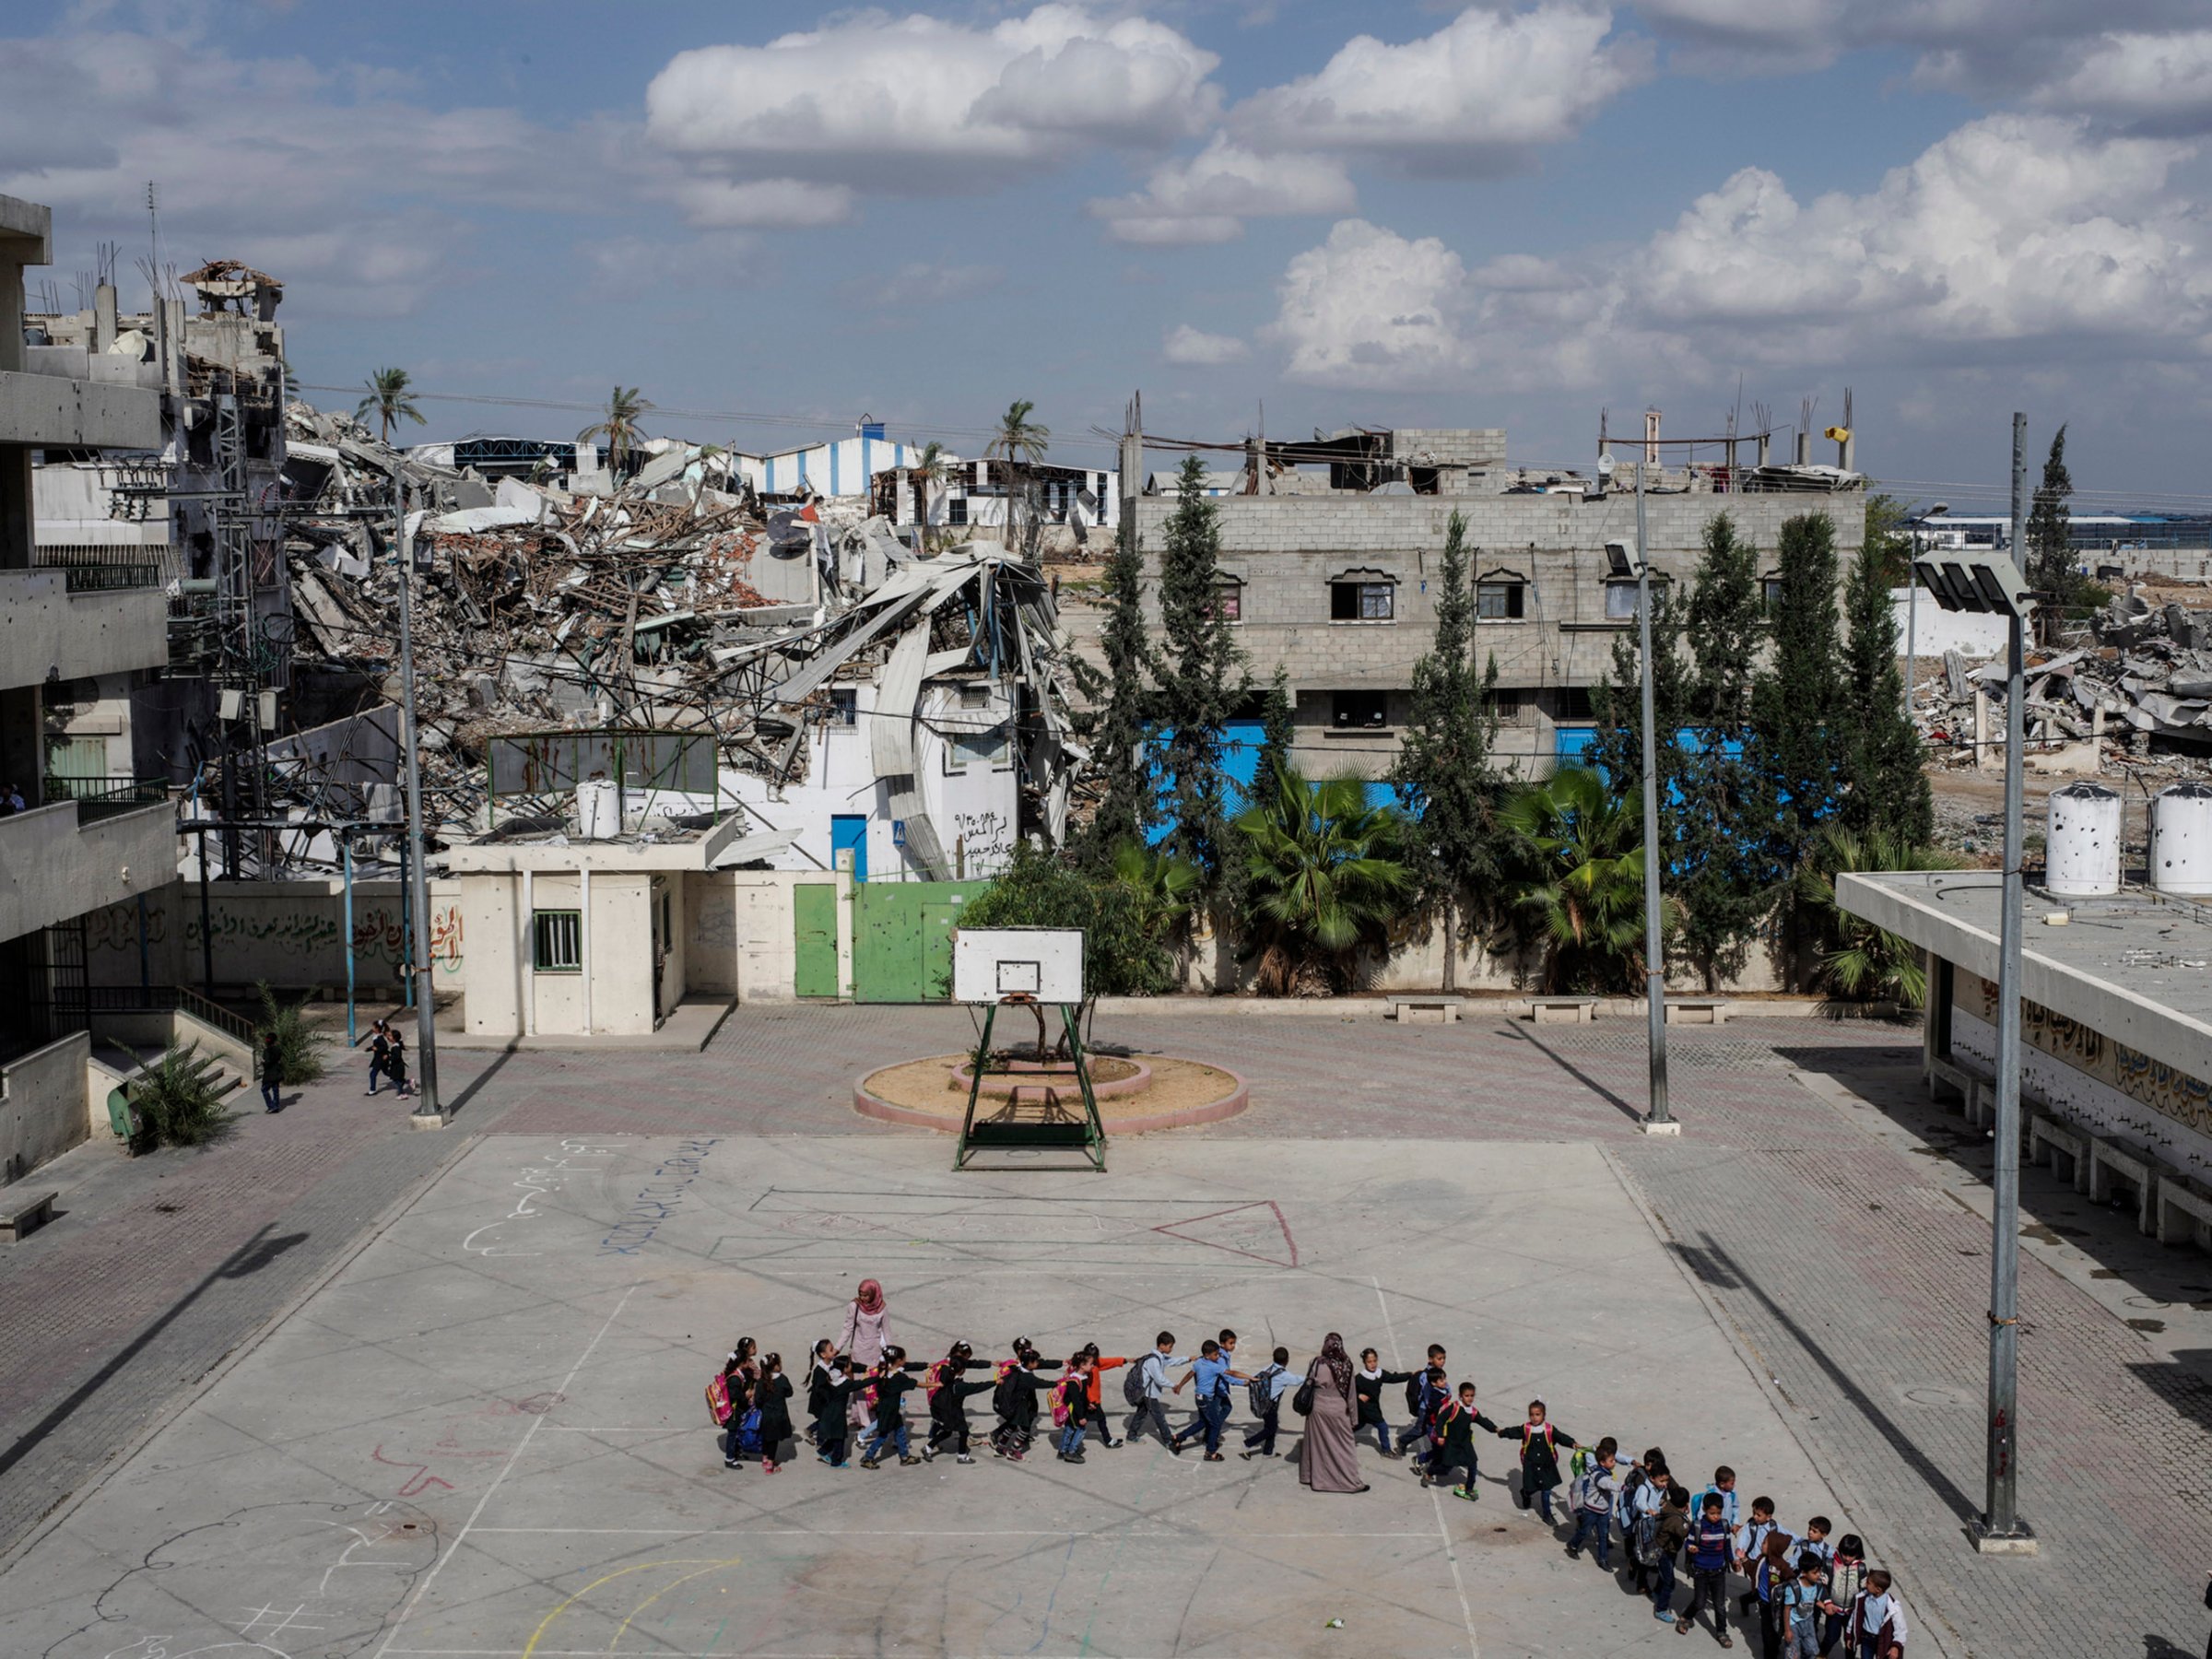 2014.  Gaza.  Palestine.  Schoolchildren head to class at the Sobhi Abu Karsh School in the Shujai'iya neighborhood. Operation Protective Edge lasted from 8 July 2014 – 26 August 2014, killing 2,189 Palestinians of which 1,486 are believed to be civilians. 66 Israeli soldiers and 6 civilians were killed.  It's estimated that 4,564 rockets were fired at Israel by Palestinian militants.